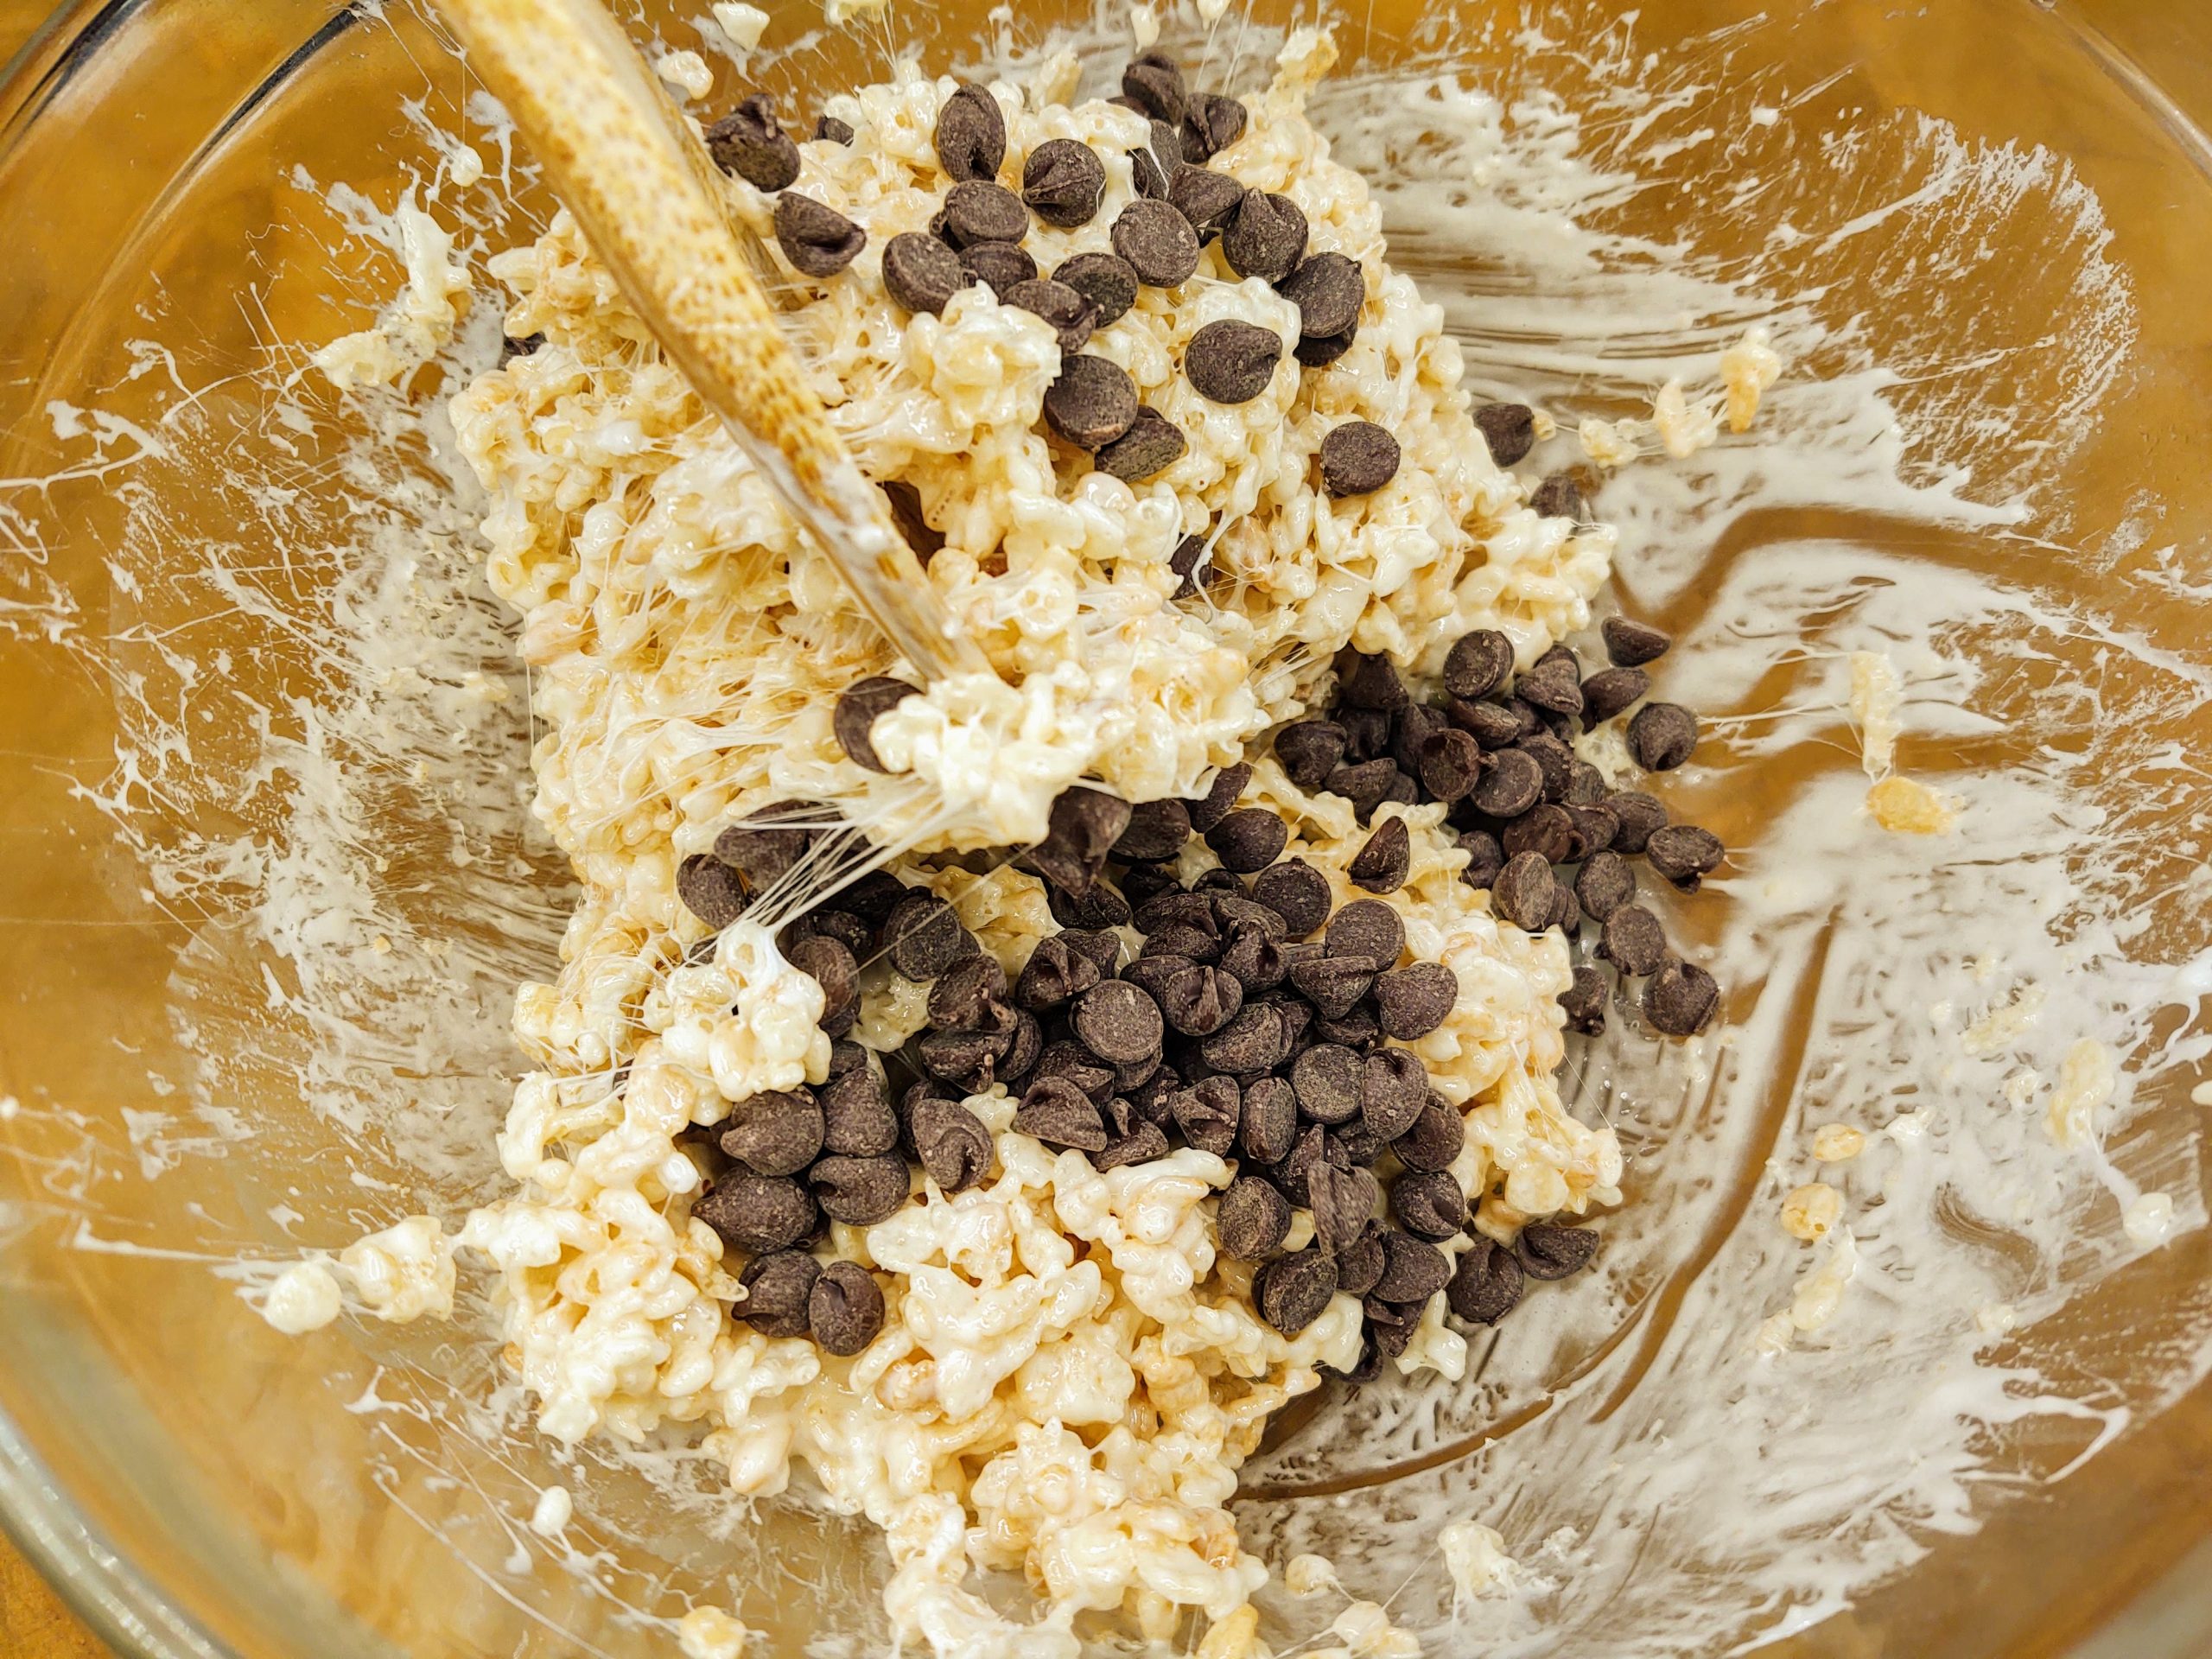 folding chocolate chips in with marshmallows and cereal in a glass bowl